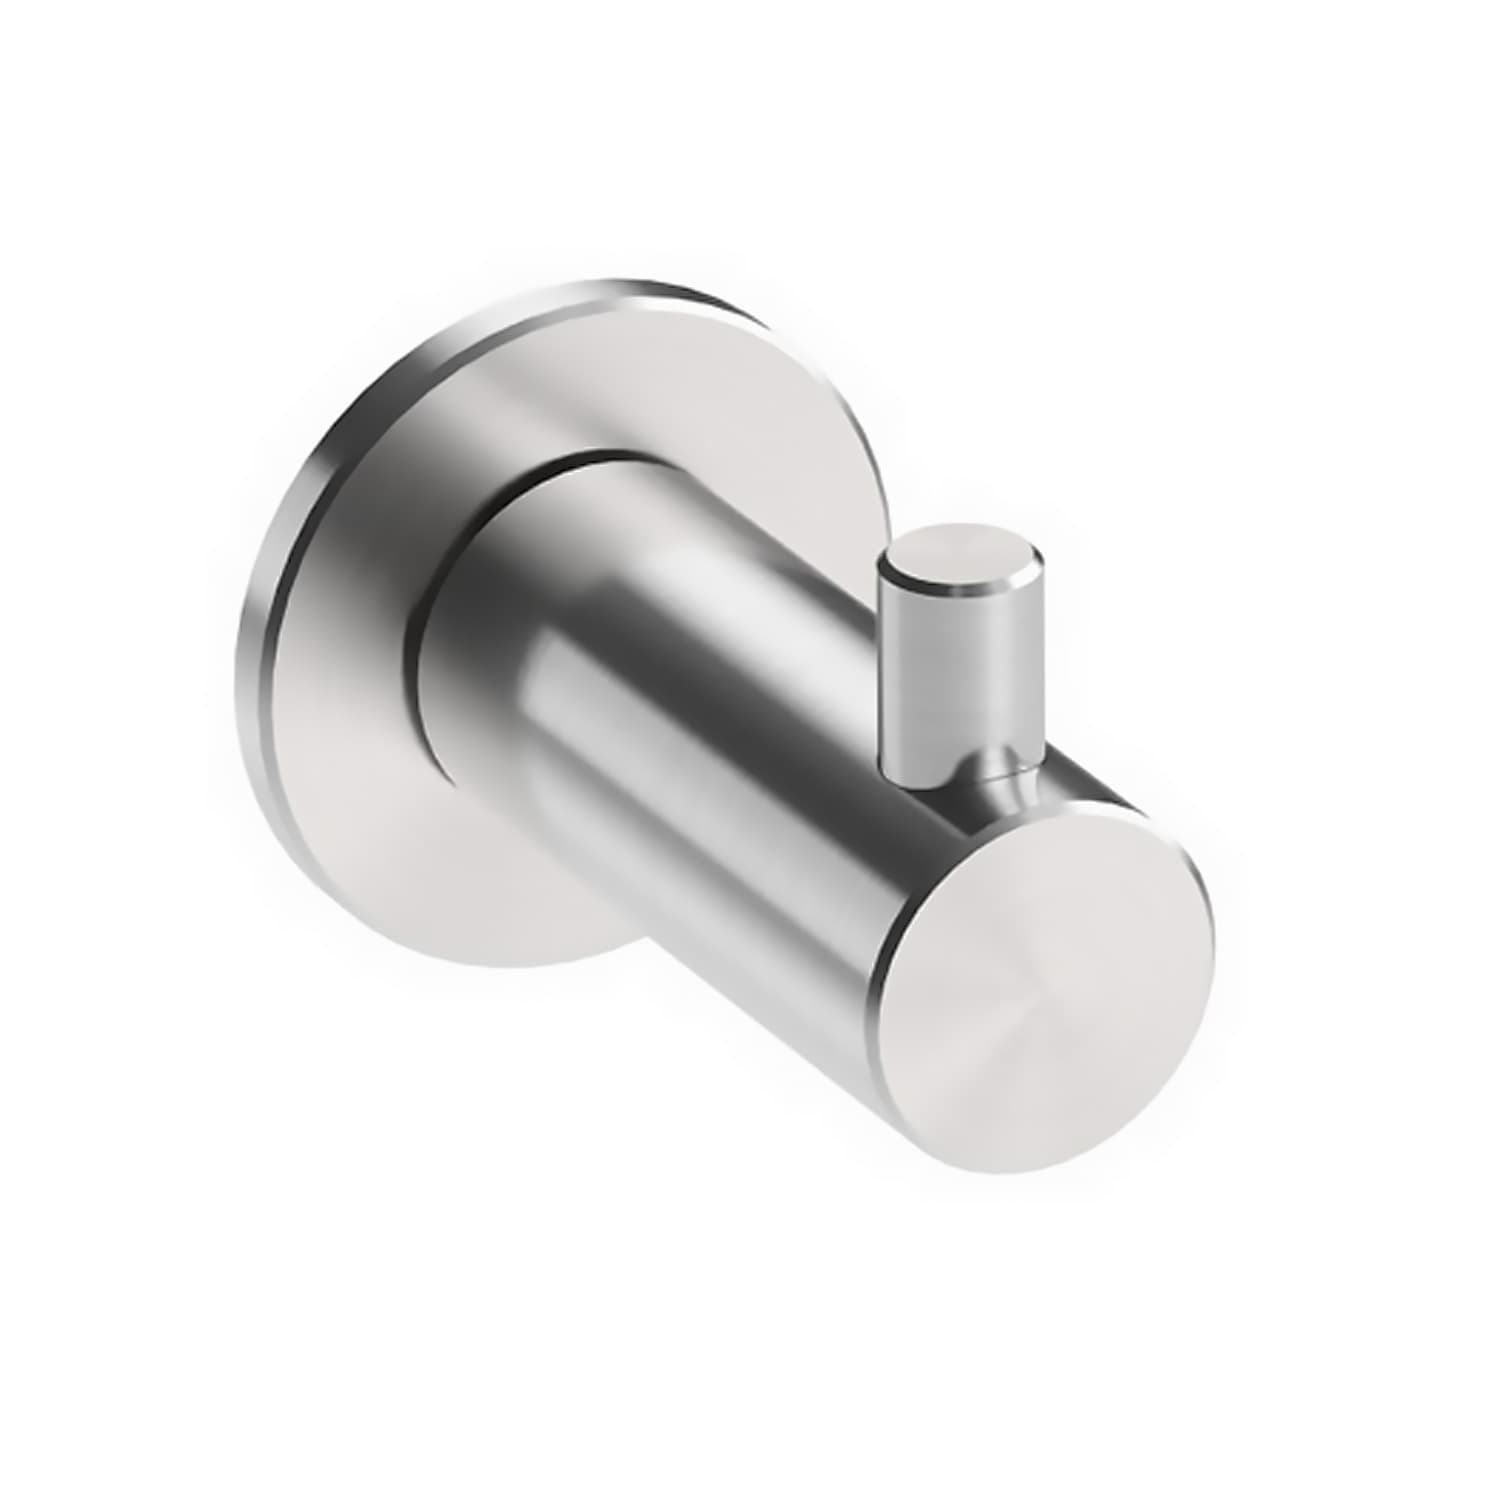 Robe Hook with Peg - Stainless Steel